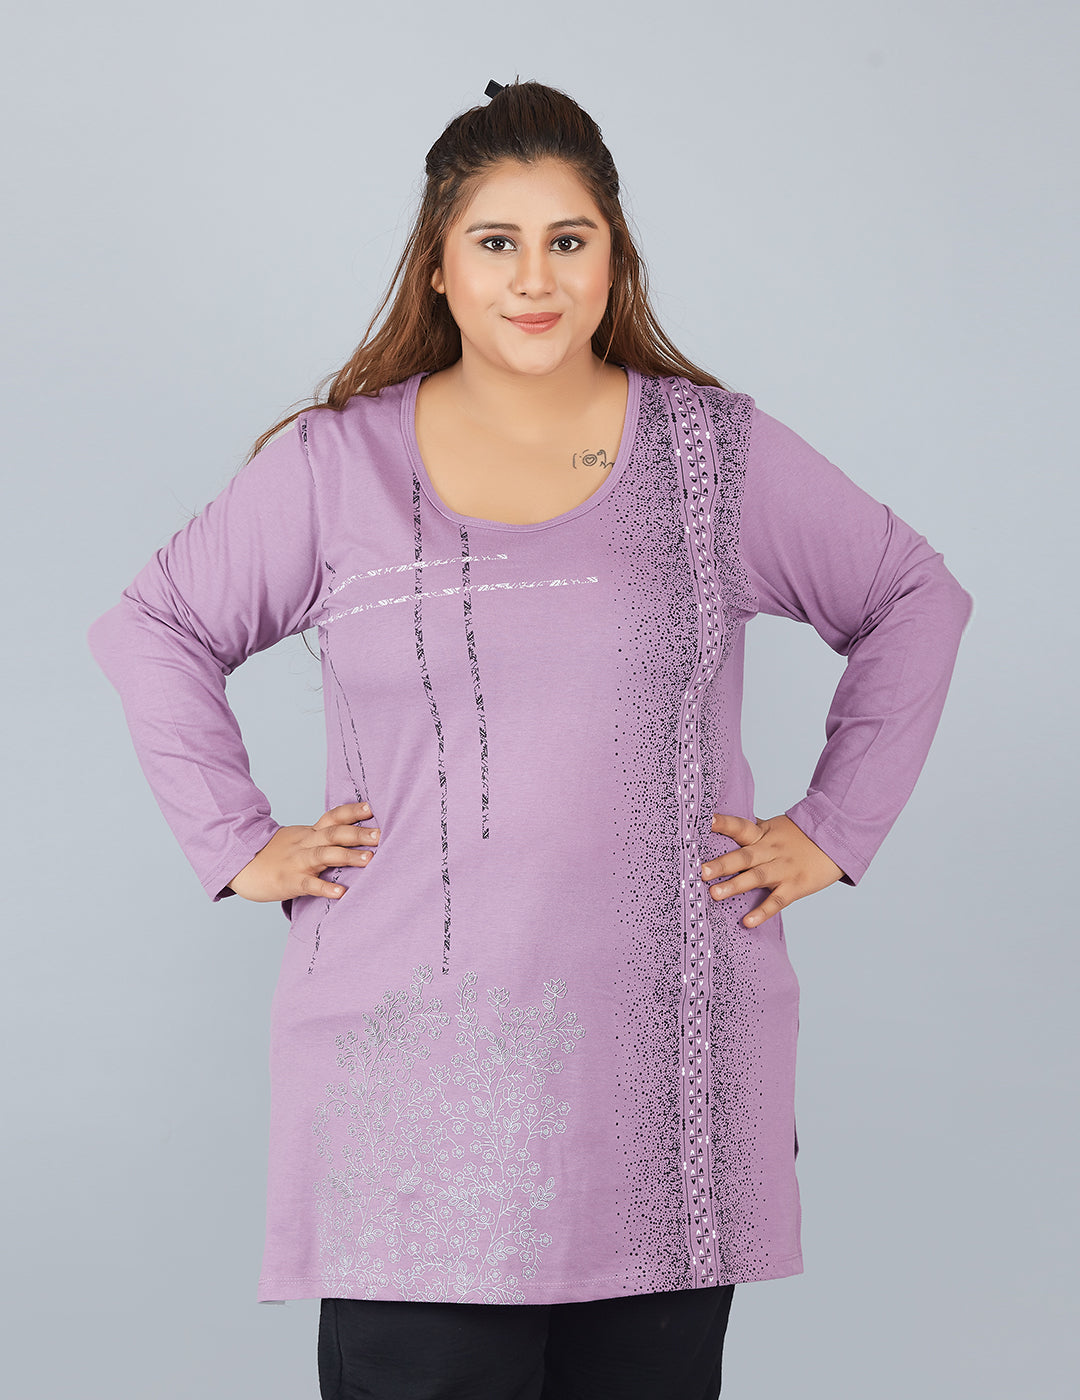 Cotton Long Top for Women Plus Size - Full Sleeves - Lavender 